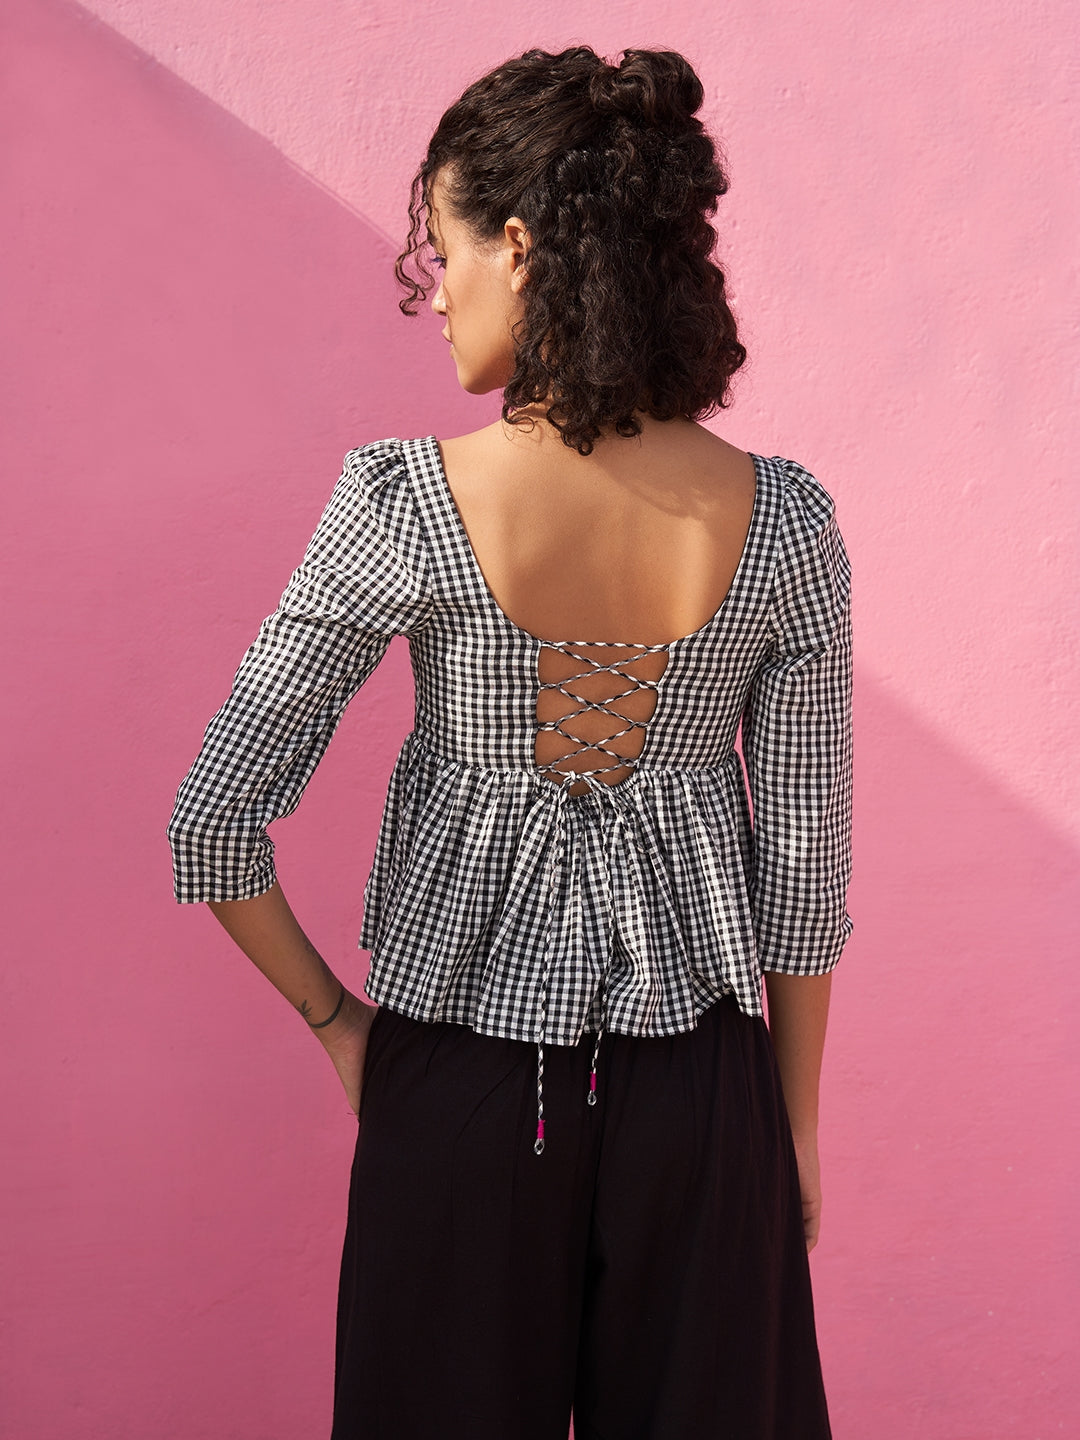 Peplum Top in Gingham Checks with Sweetheart Neckline